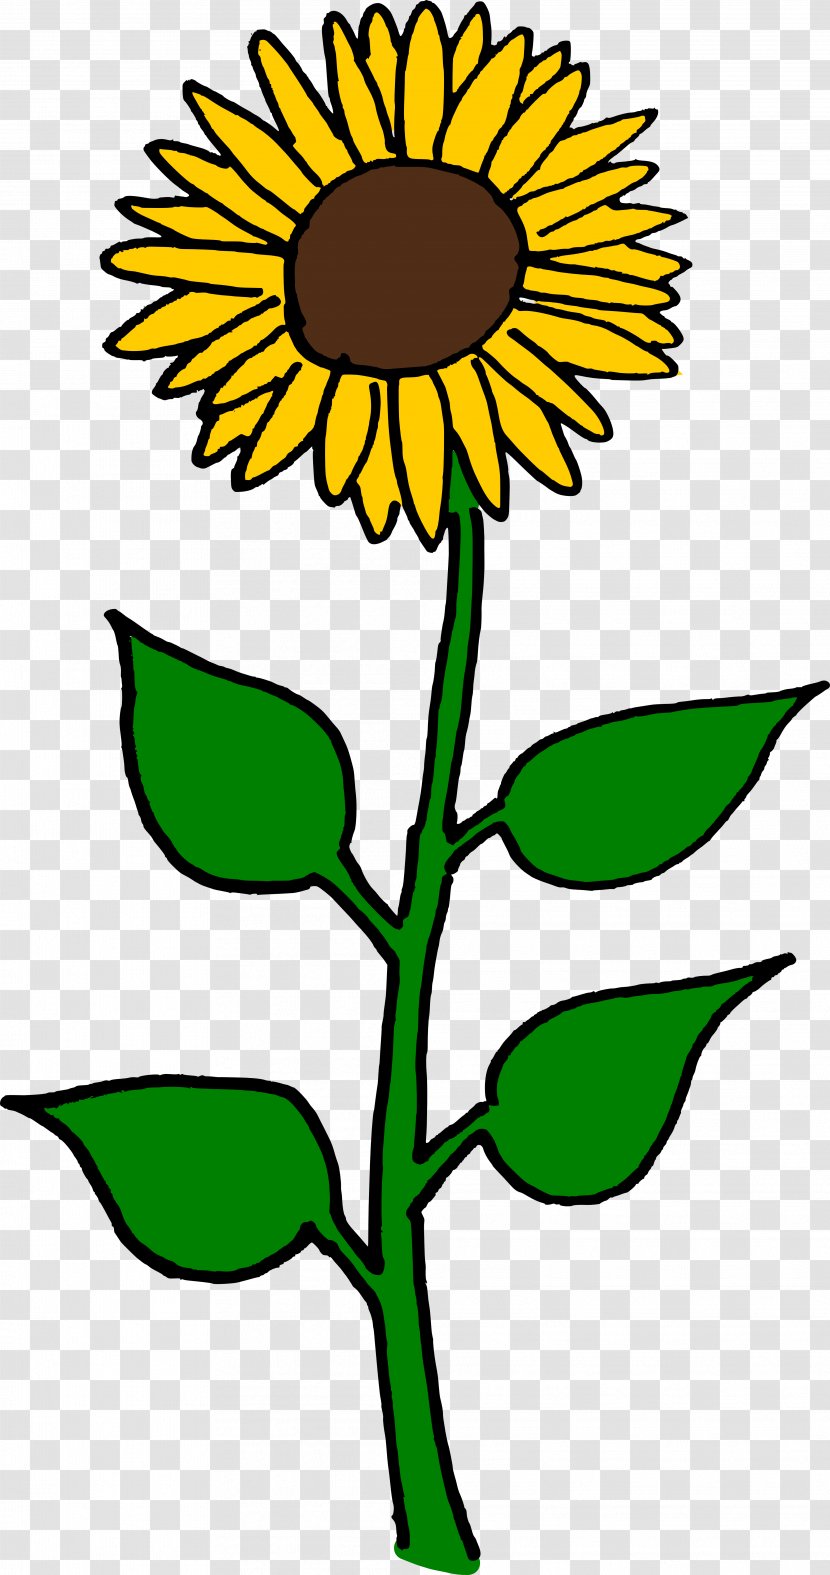 Common Sunflower Seed Helianthus Giganteus Clip Art - Daisy Family - Sunflowers Transparent PNG